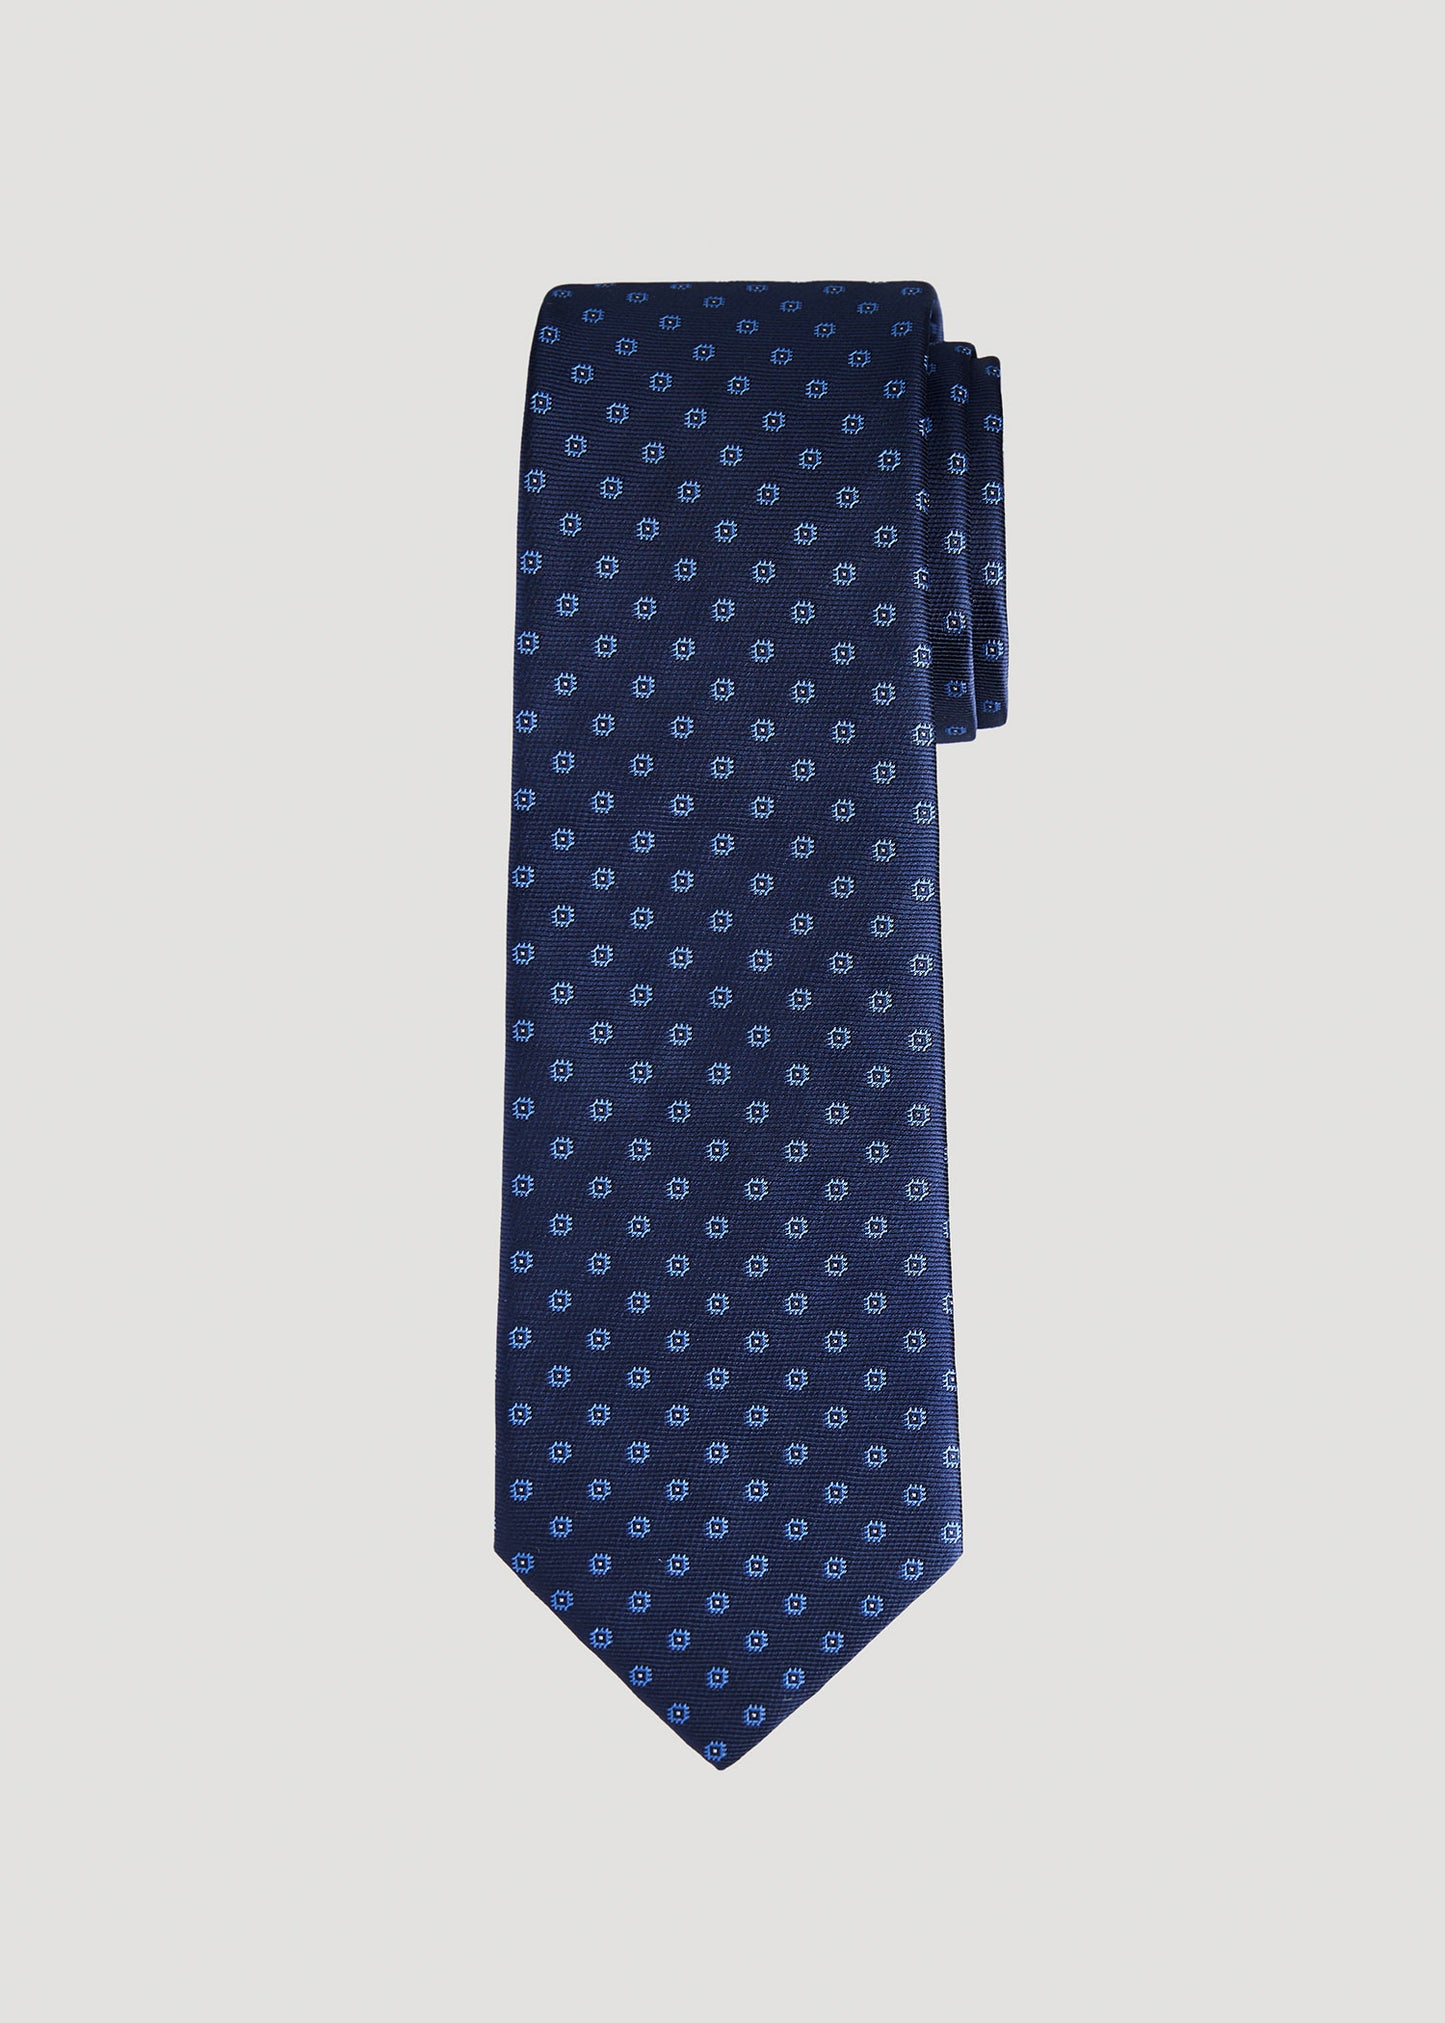       American-Tall-Men-Tie-Blue-Dobby-Front